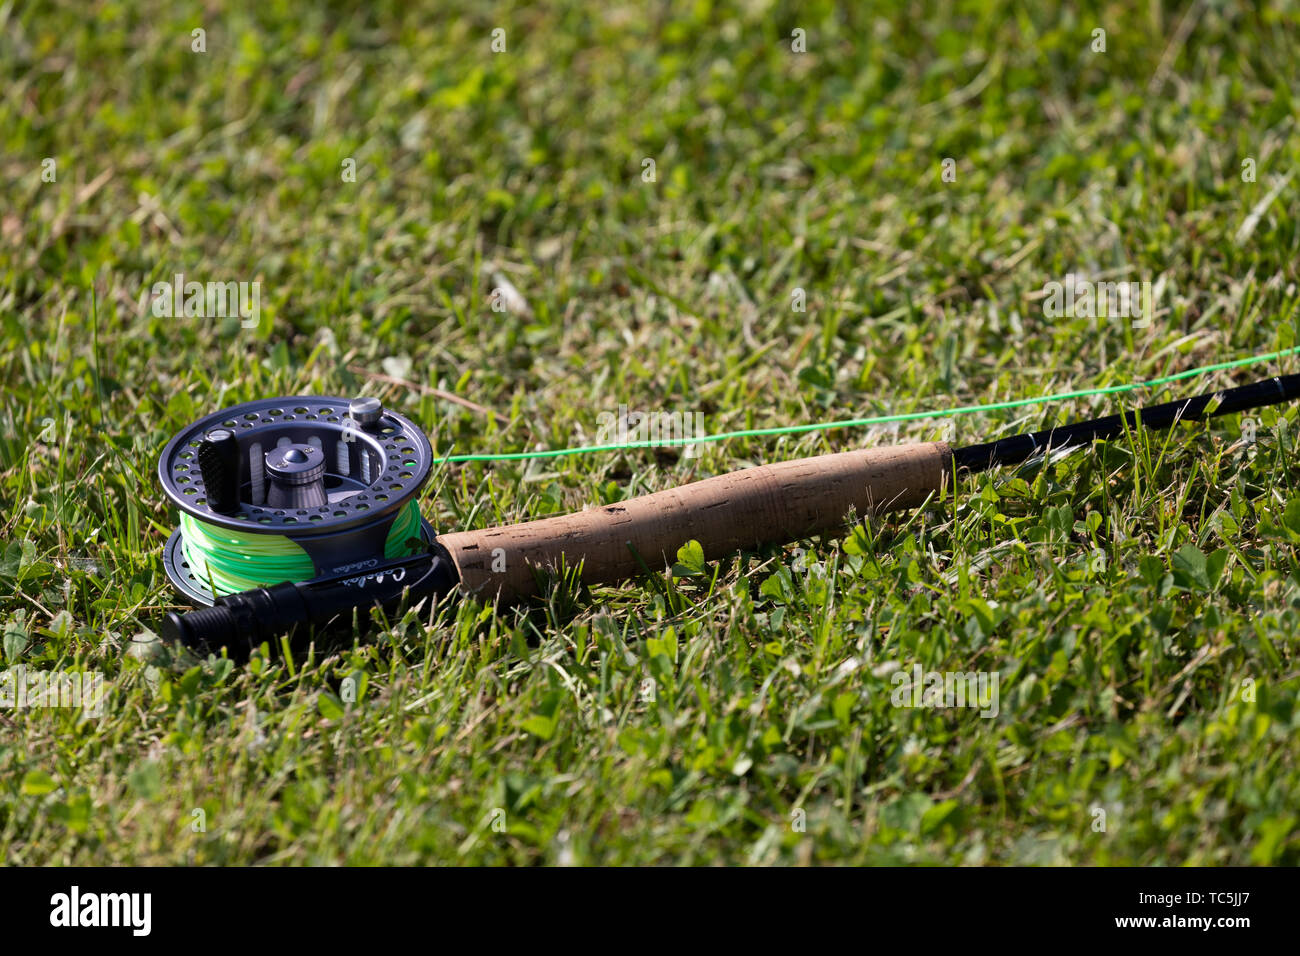 Cabelas Fly Fishing Rod and Reel Stock Photo